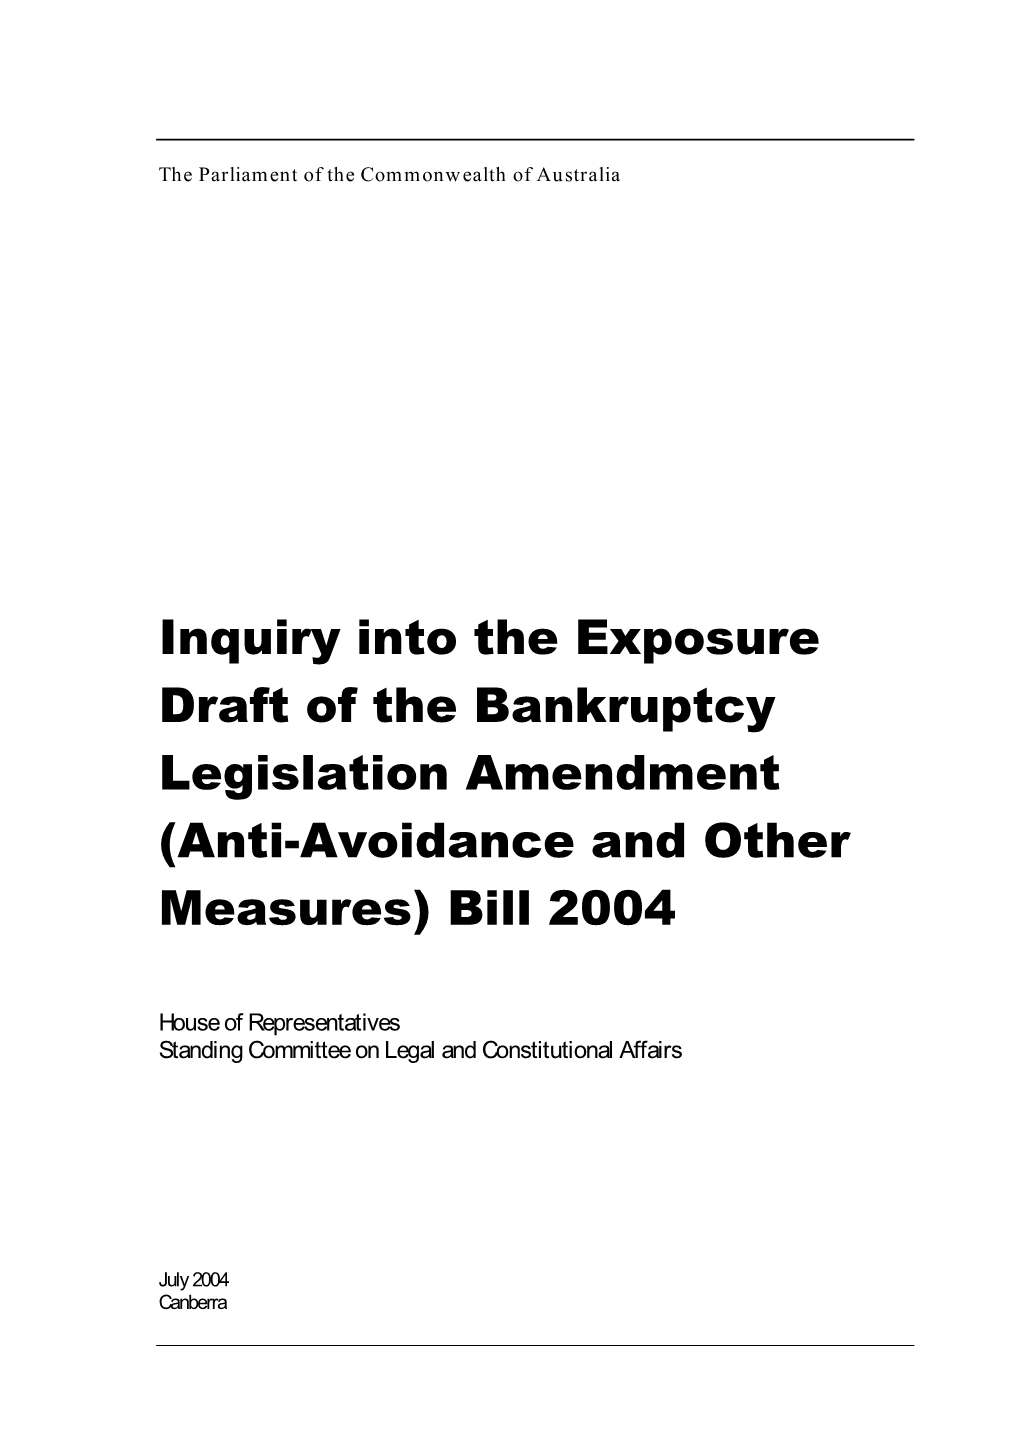 Inquiry Into the Exposure Draft of the Bankruptcy Legislation Amendment (Anti-Avoidance and Other Measures) Bill 2004